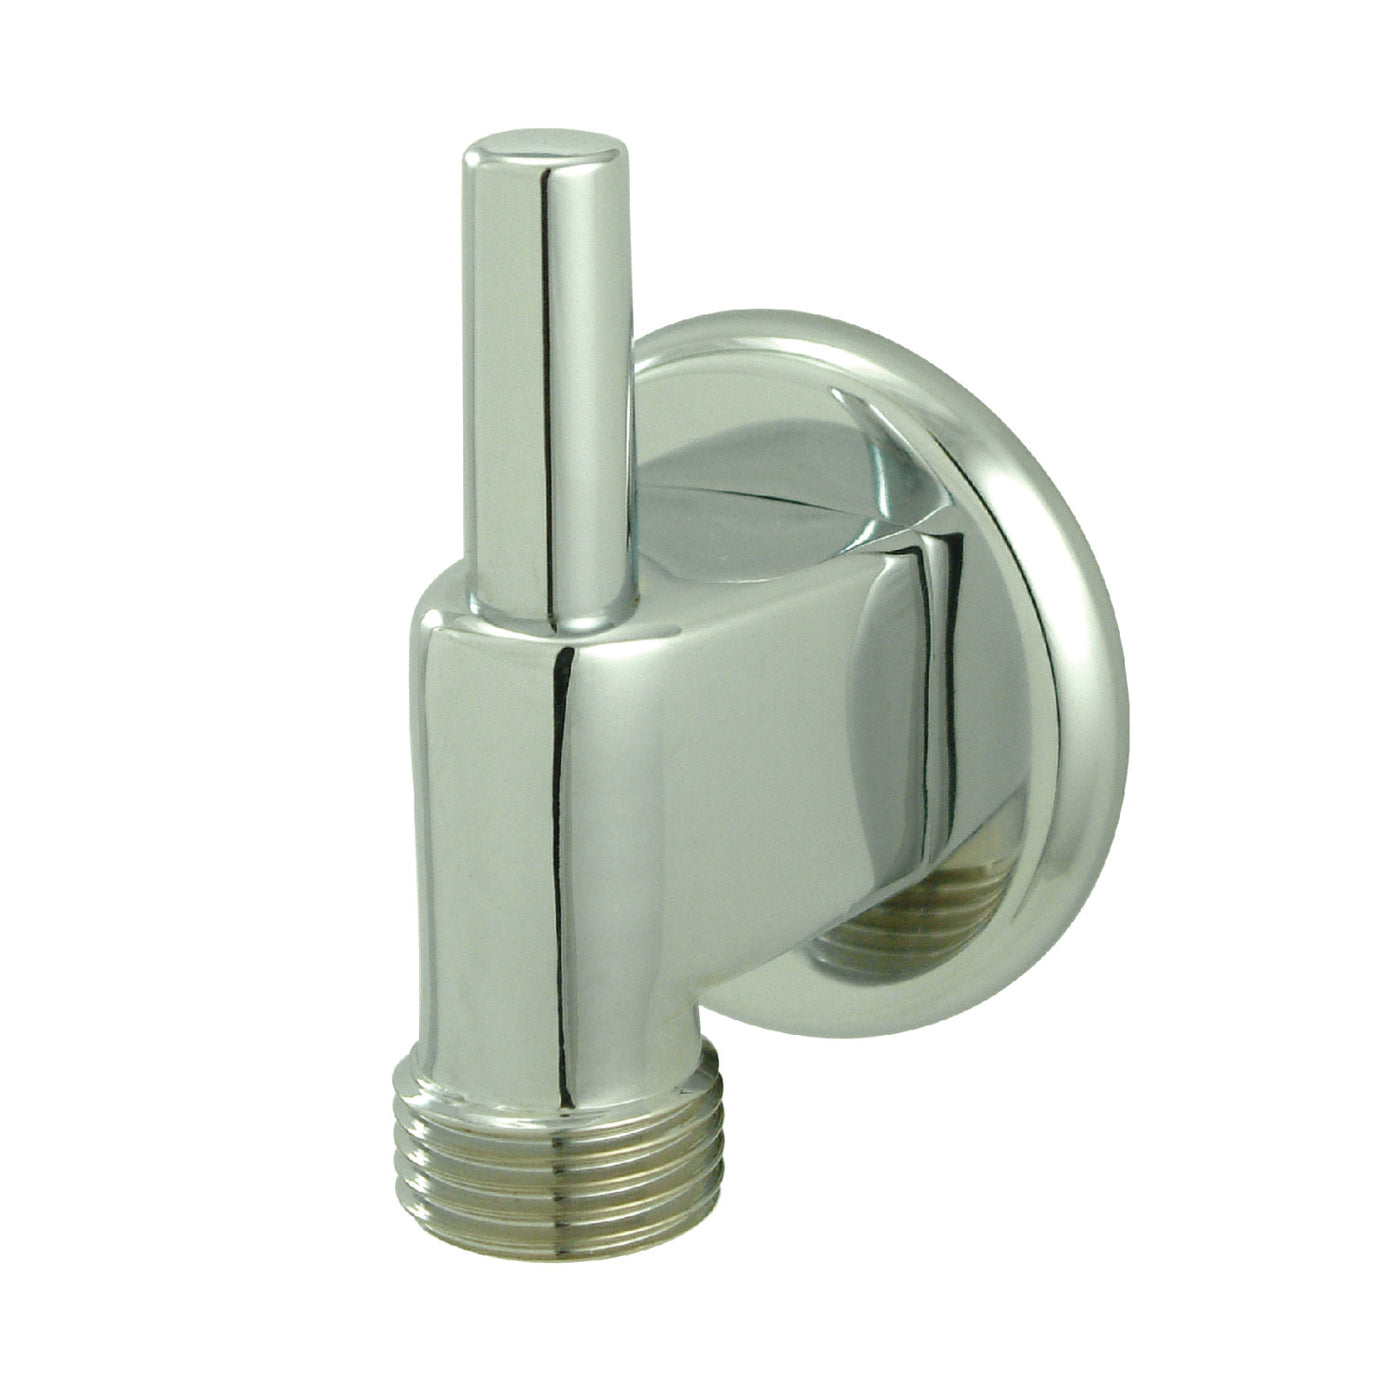 Elements of Design DK174A1 Wall Mount Supply Elbow with Pin Wall Hook, Polished Chrome